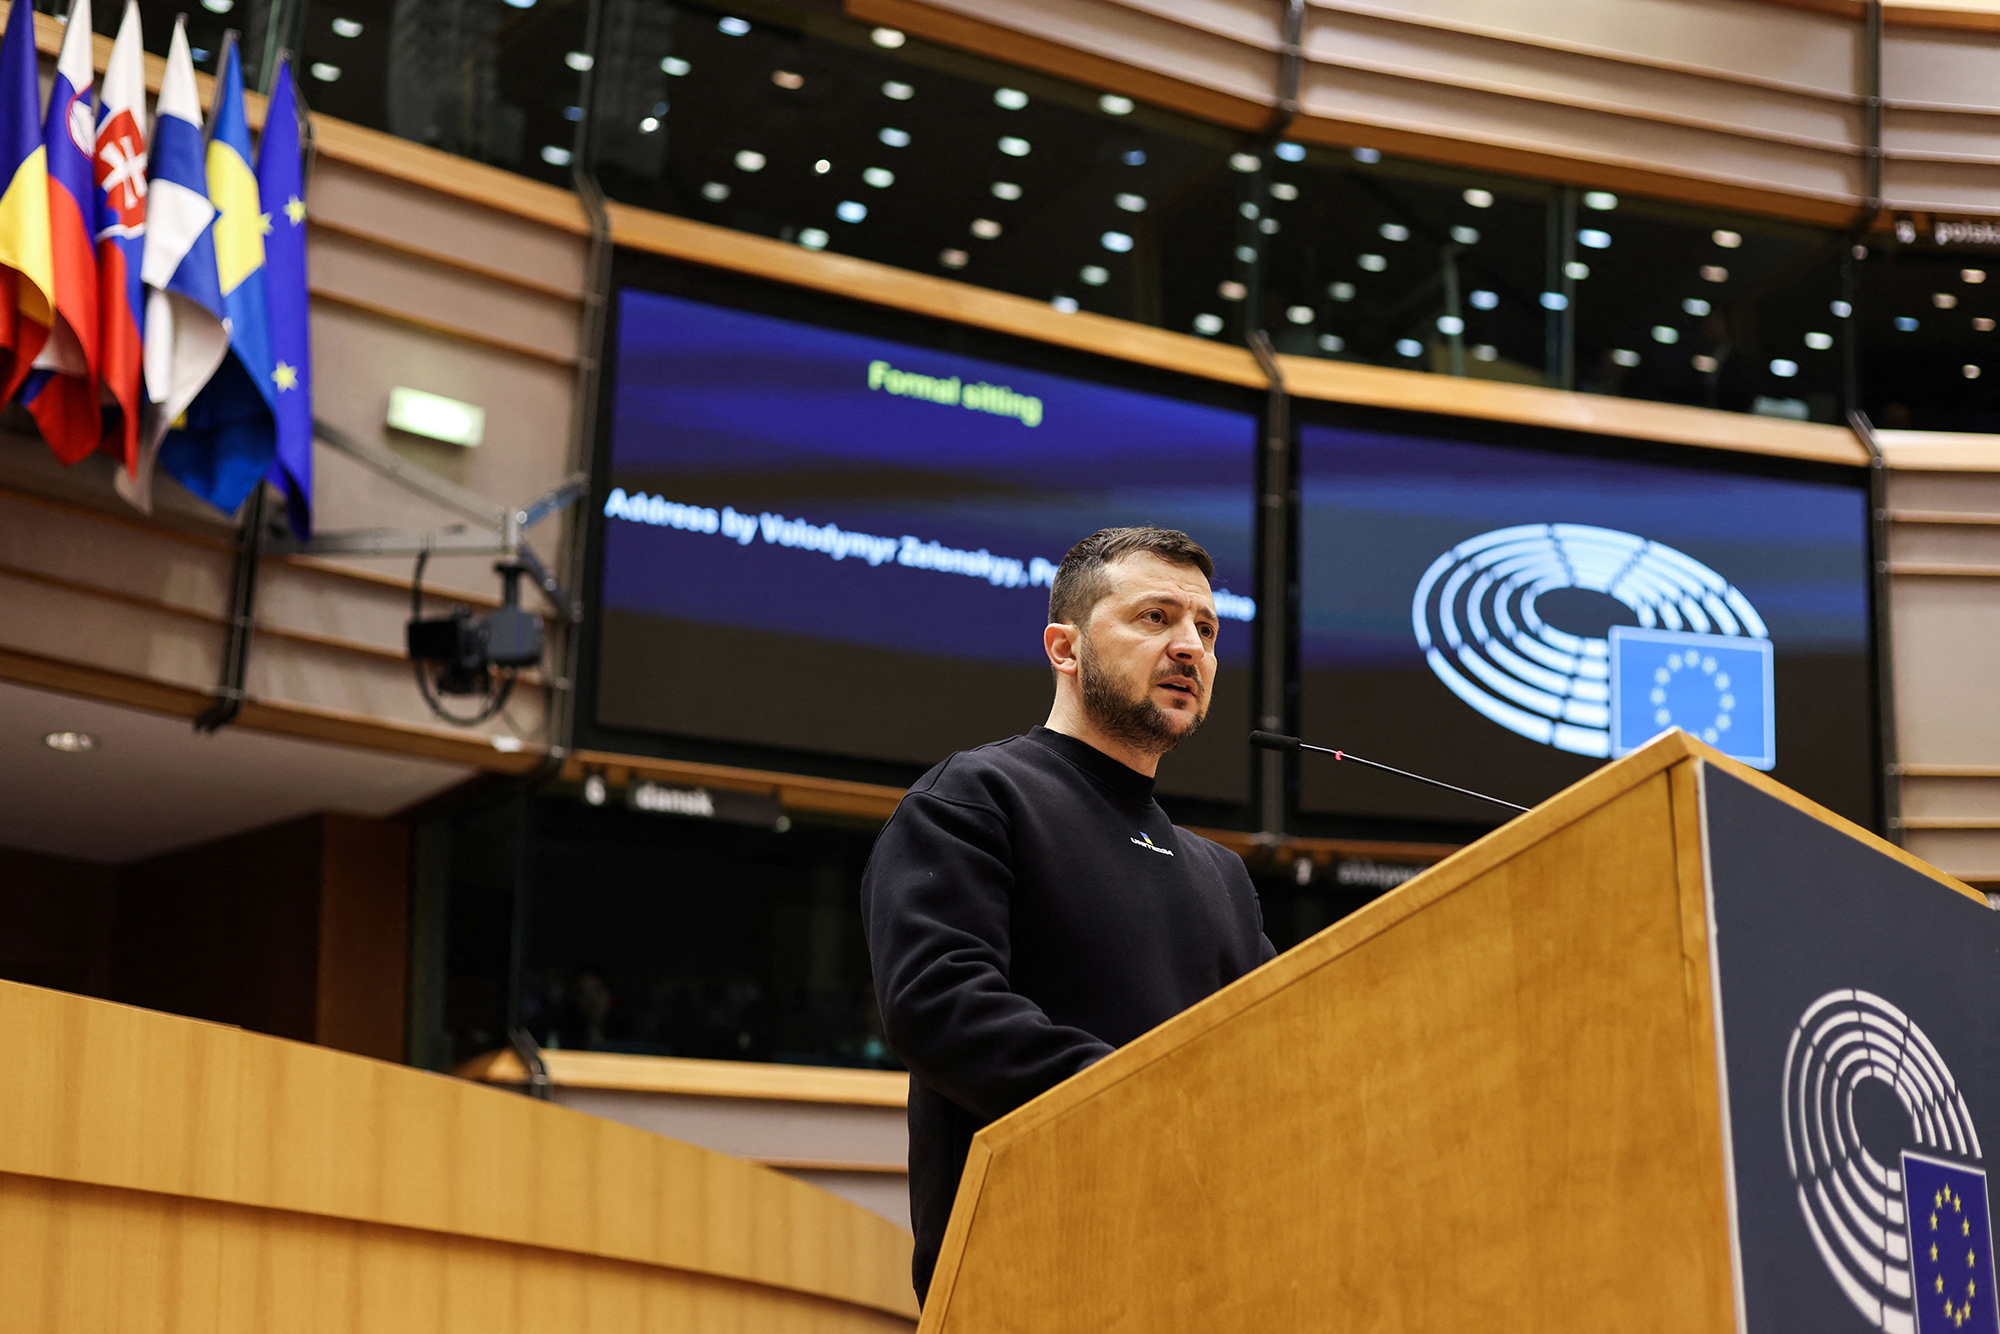 Zelensky delivers a speech at the start of a summit at the EU parliament in Brussels, Belgium, on February 9.